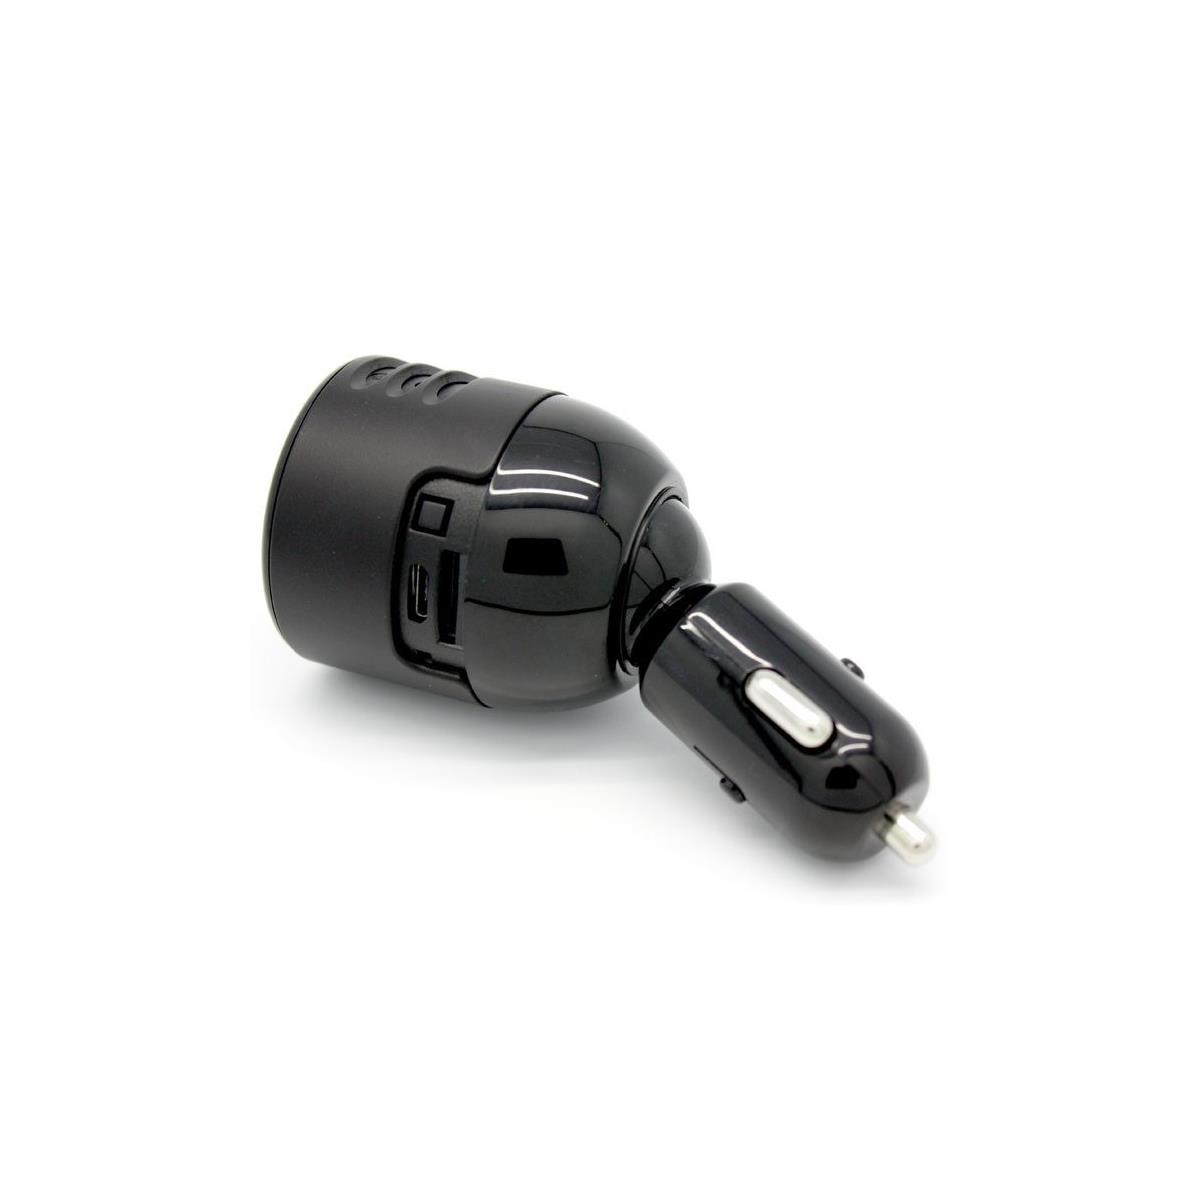 Image of KJB Security Products Lawmate DVR277IR Car Charger with 1080p Camera and DVR